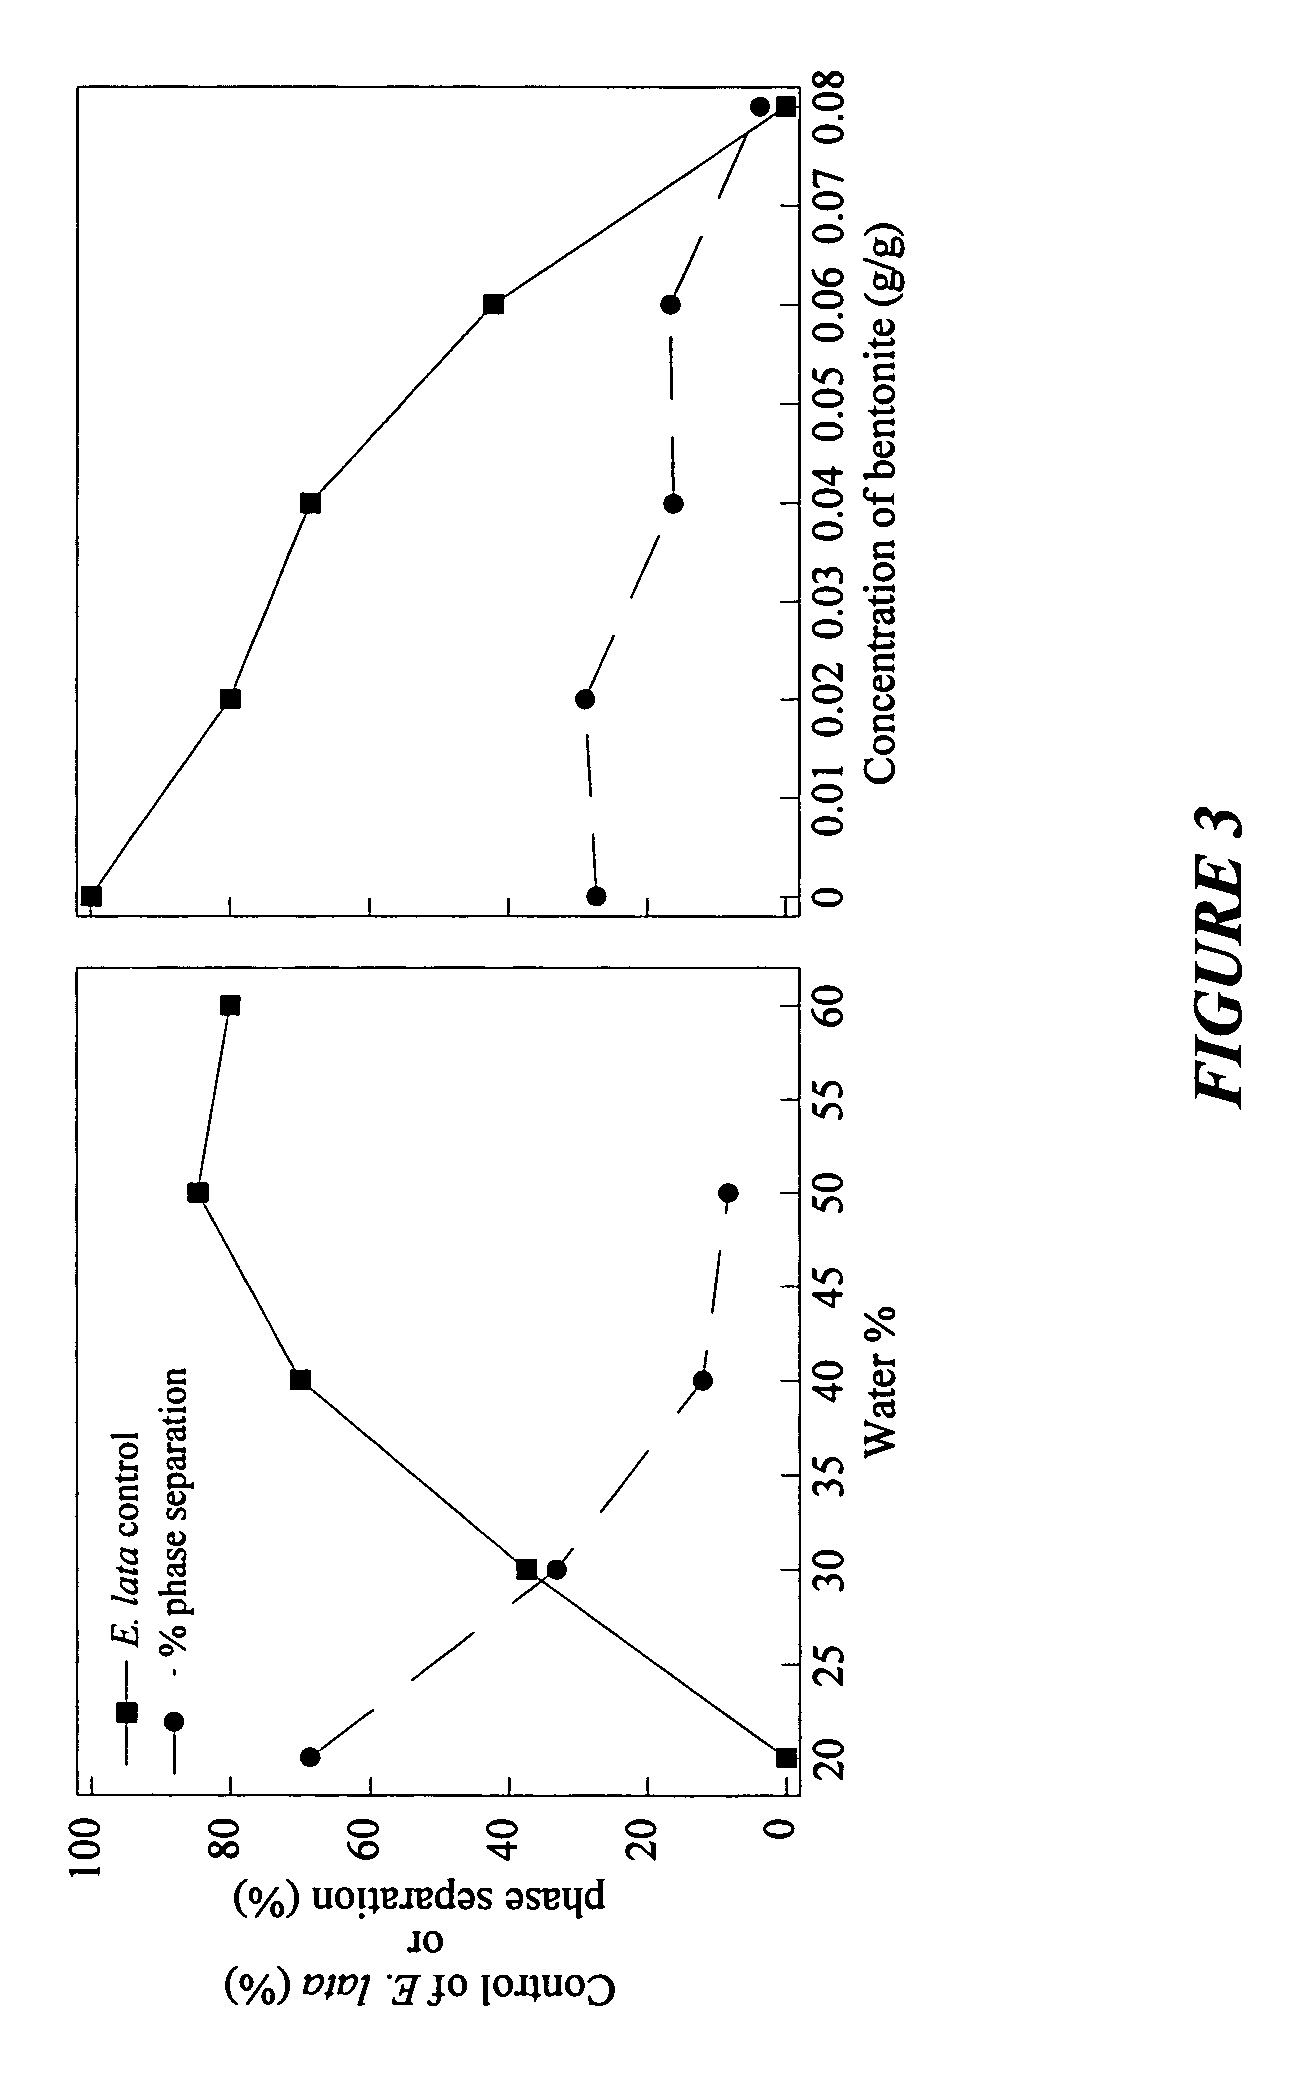 Storage stable compositions of biological materials